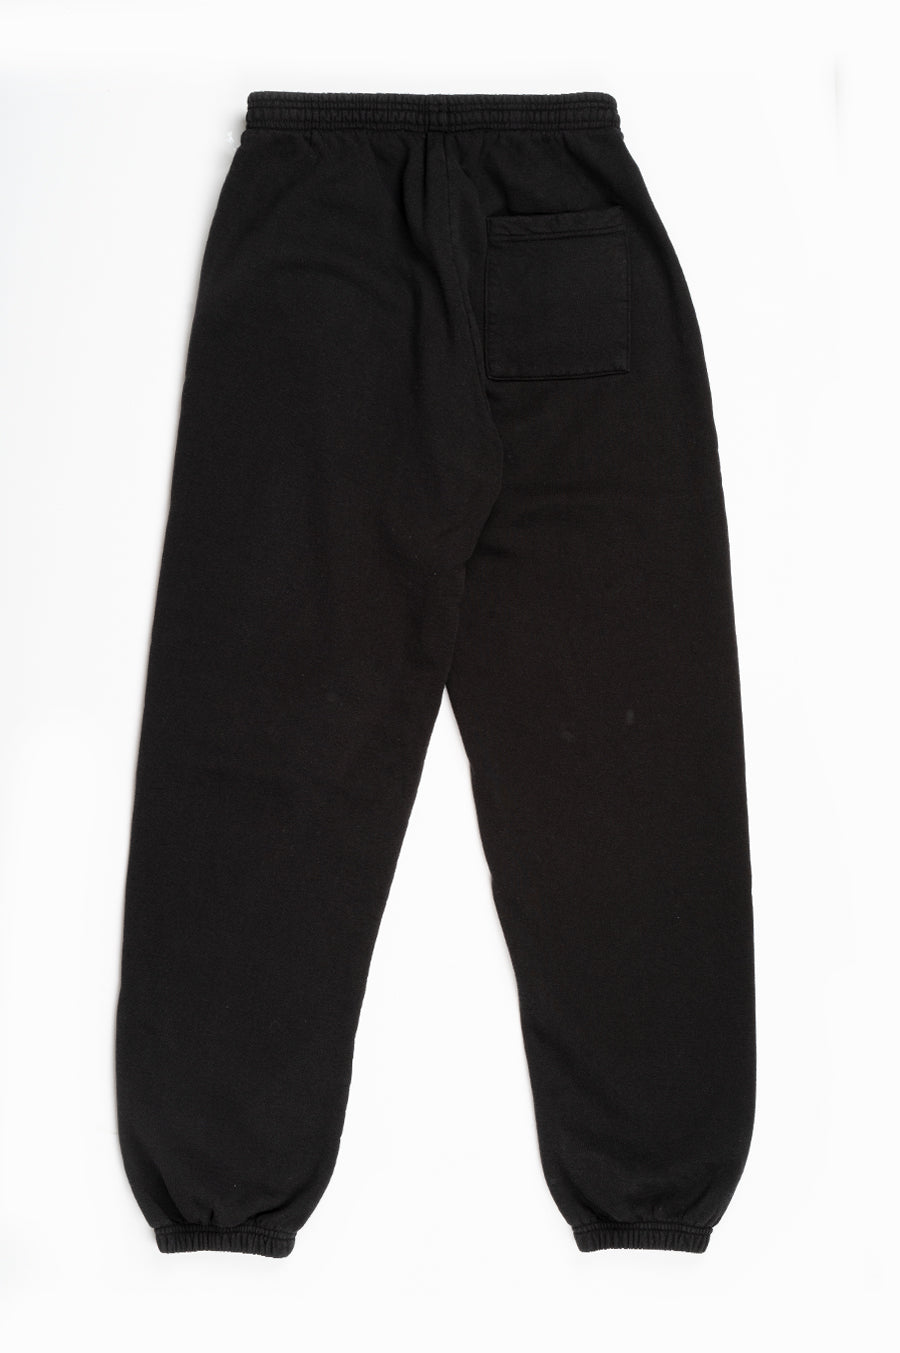 SPORTY AND RICH CLASSIC LOGO SWEATPANTS BLACK – BLENDS